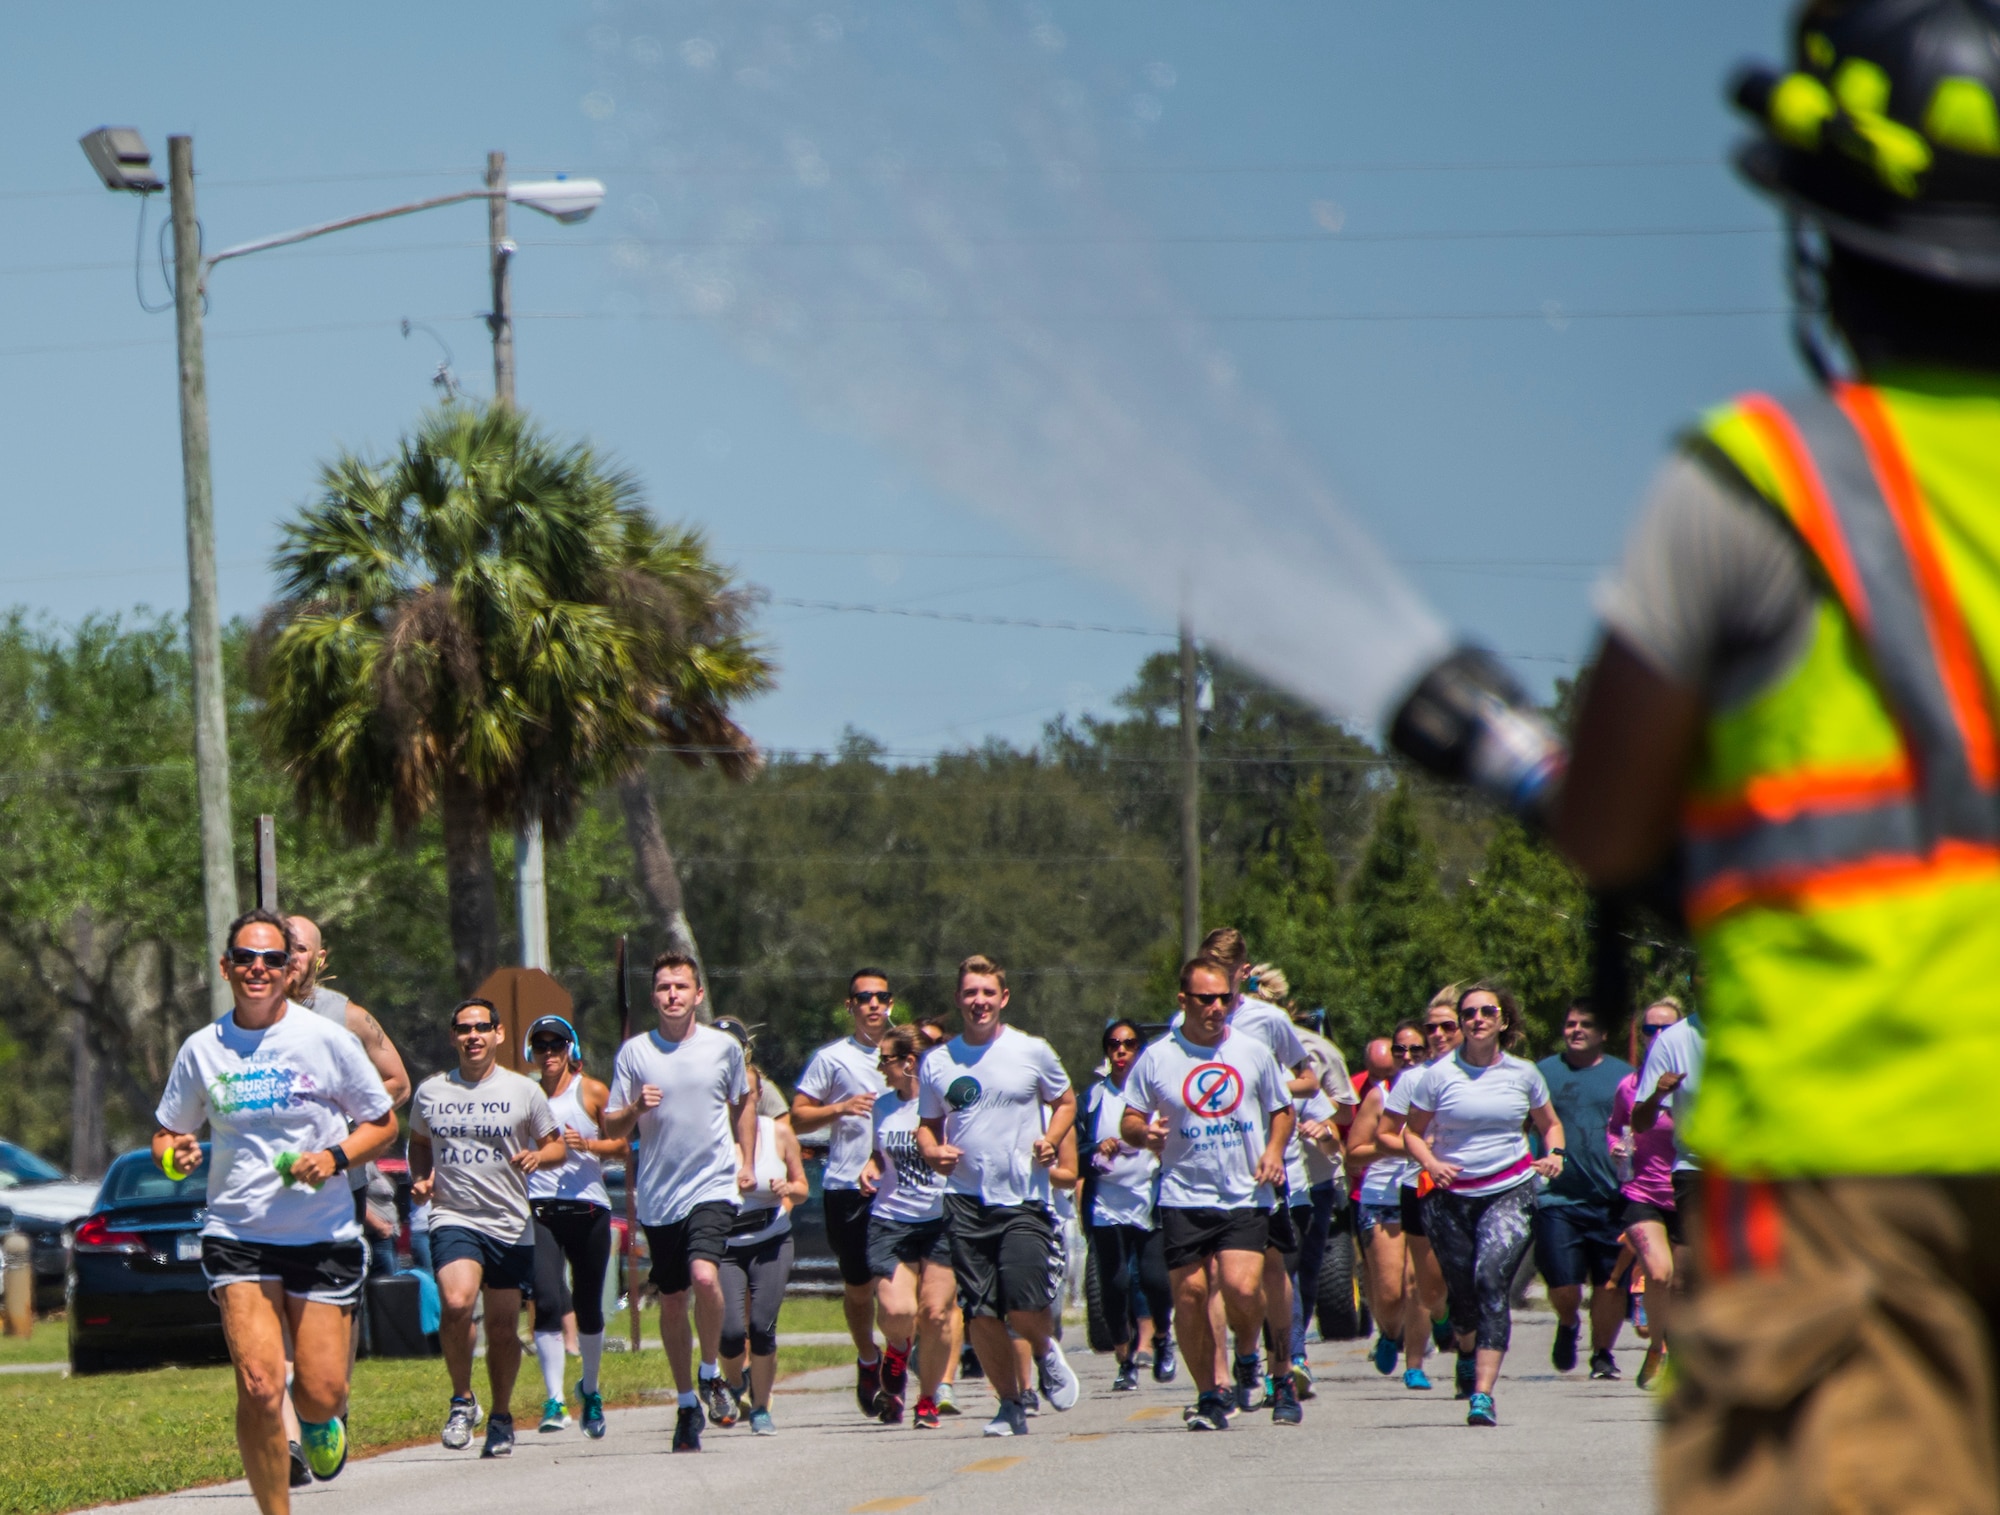 A firefighter sprays water on run participants during the 4th annual Color Me Aware Fun Run April 6 near the Civil Engineer Pavilion at Eglin Air Force Base, Fla. The run is held to raise sexual assault awareness. (U.S. Air Force photo/Ilka Cole)